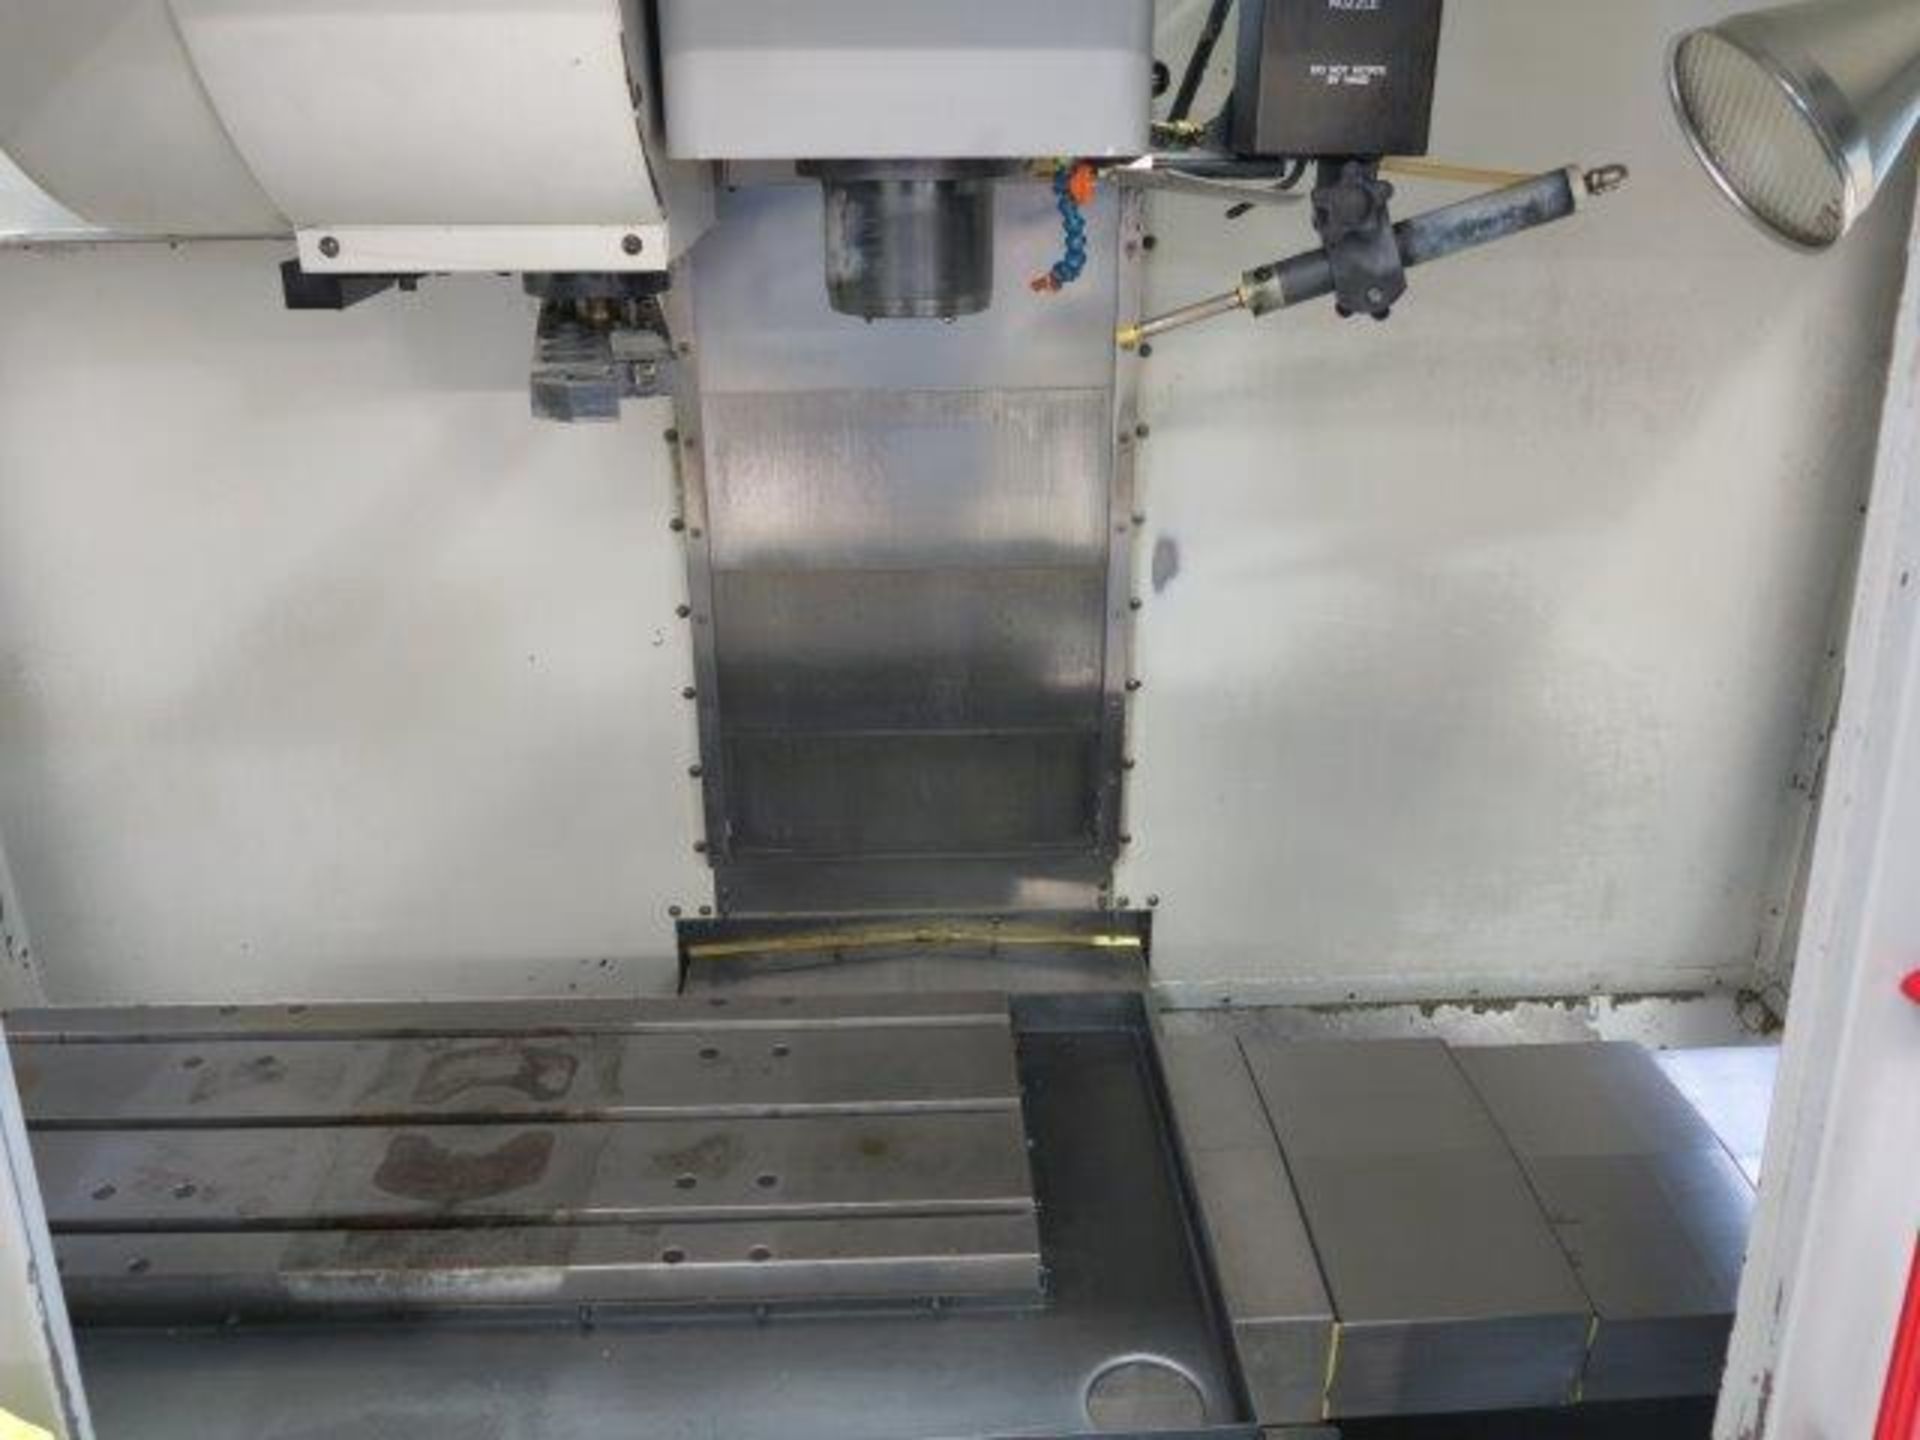 2001 HAAS VF-2, TRAVELS: 30" X 16" X 20", 7500 RPM SPINDLE, CAT 40 TAPER, 20 STATION ATC, 15 HP, - Image 6 of 6